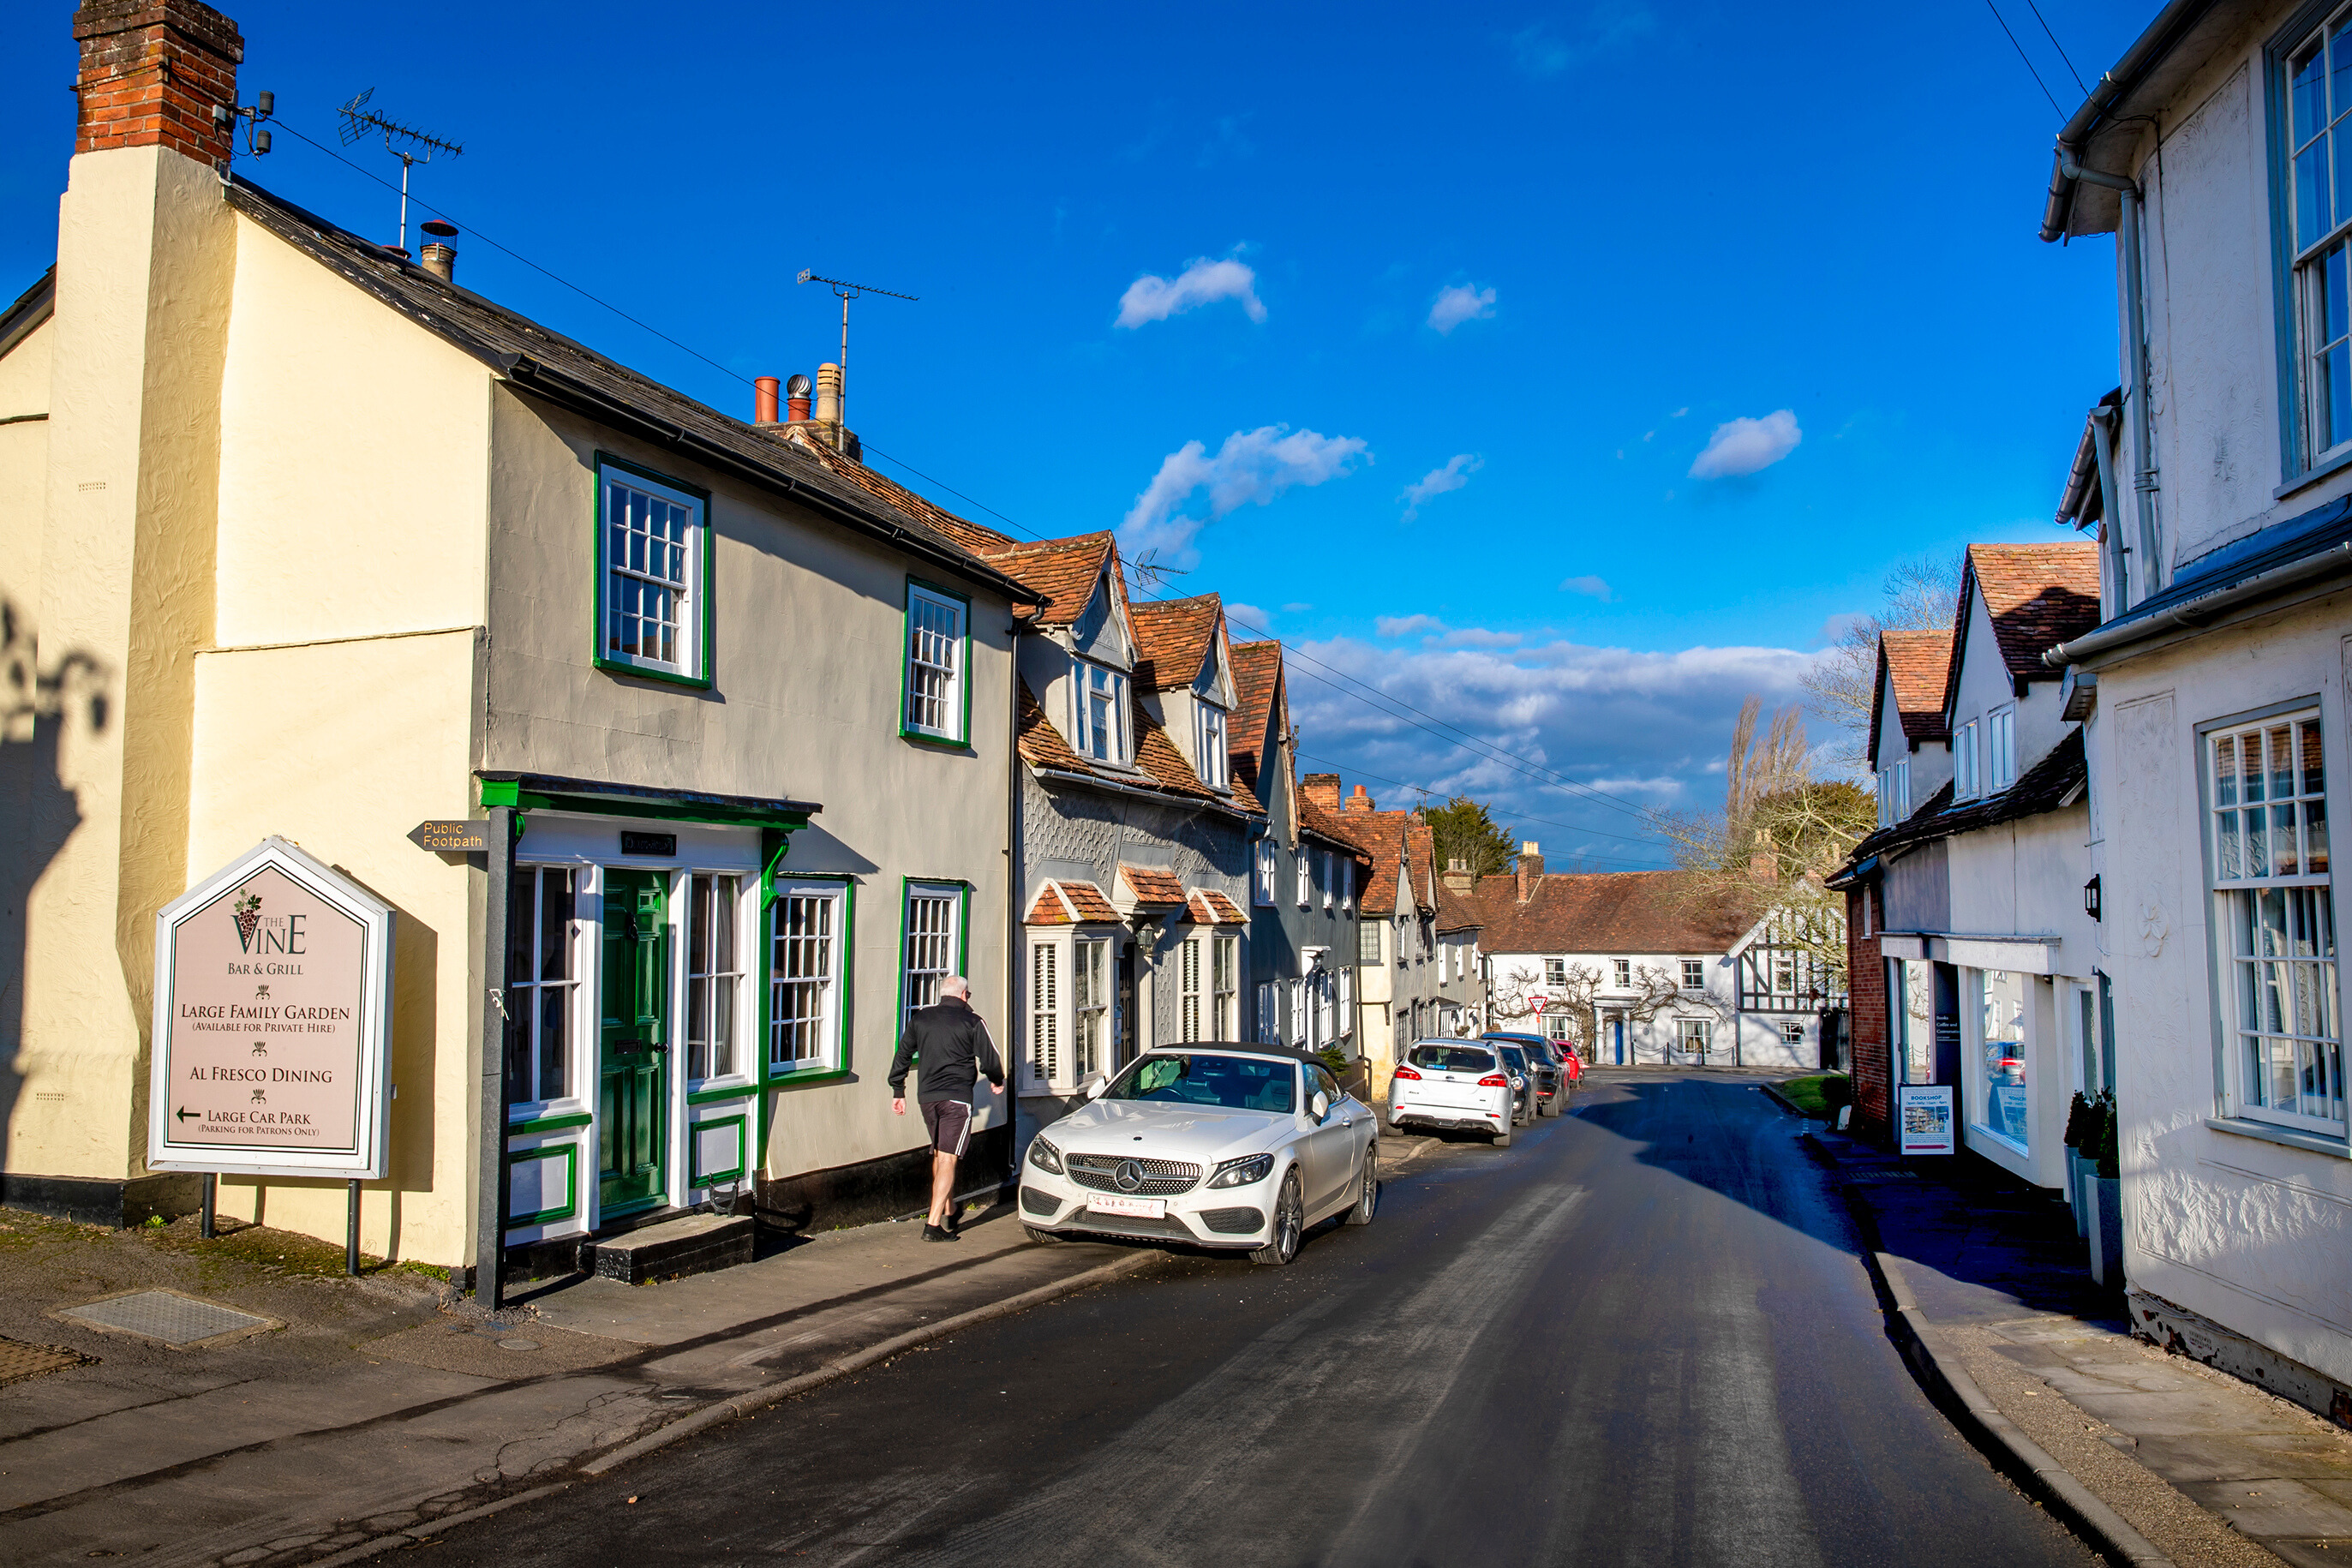 Great bardfield village of houses and a road with cars parked - Image